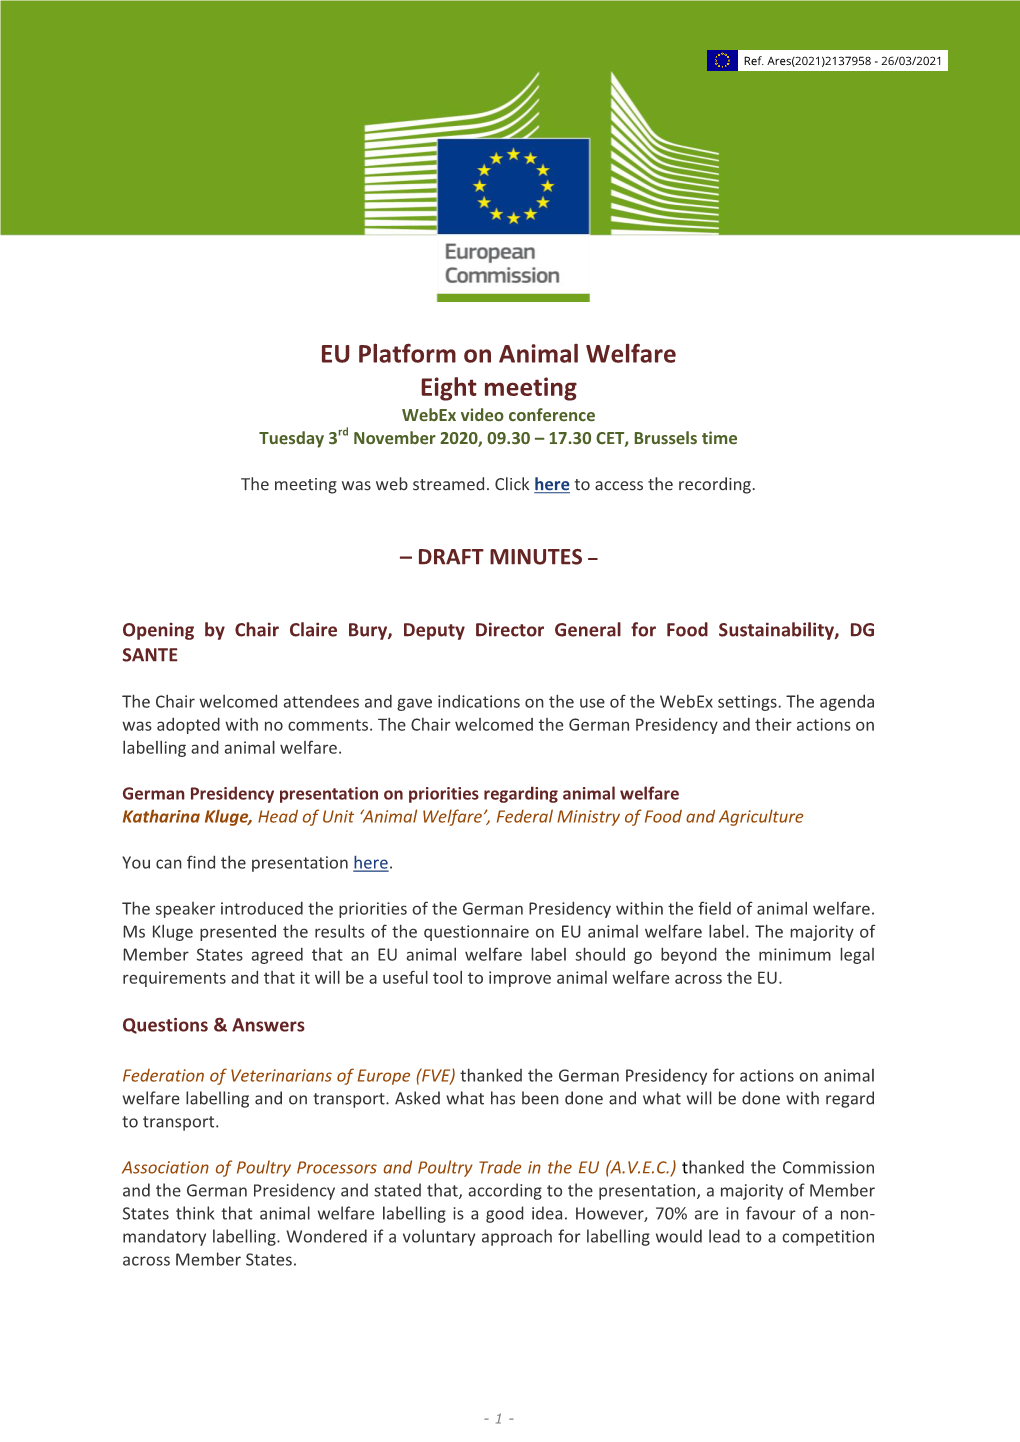 EU Platform on Animal Welfare Eight Meeting Webex Video Conference Tuesday 3Rd November 2020, 09.30 – 17.30 CET, Brussels Time